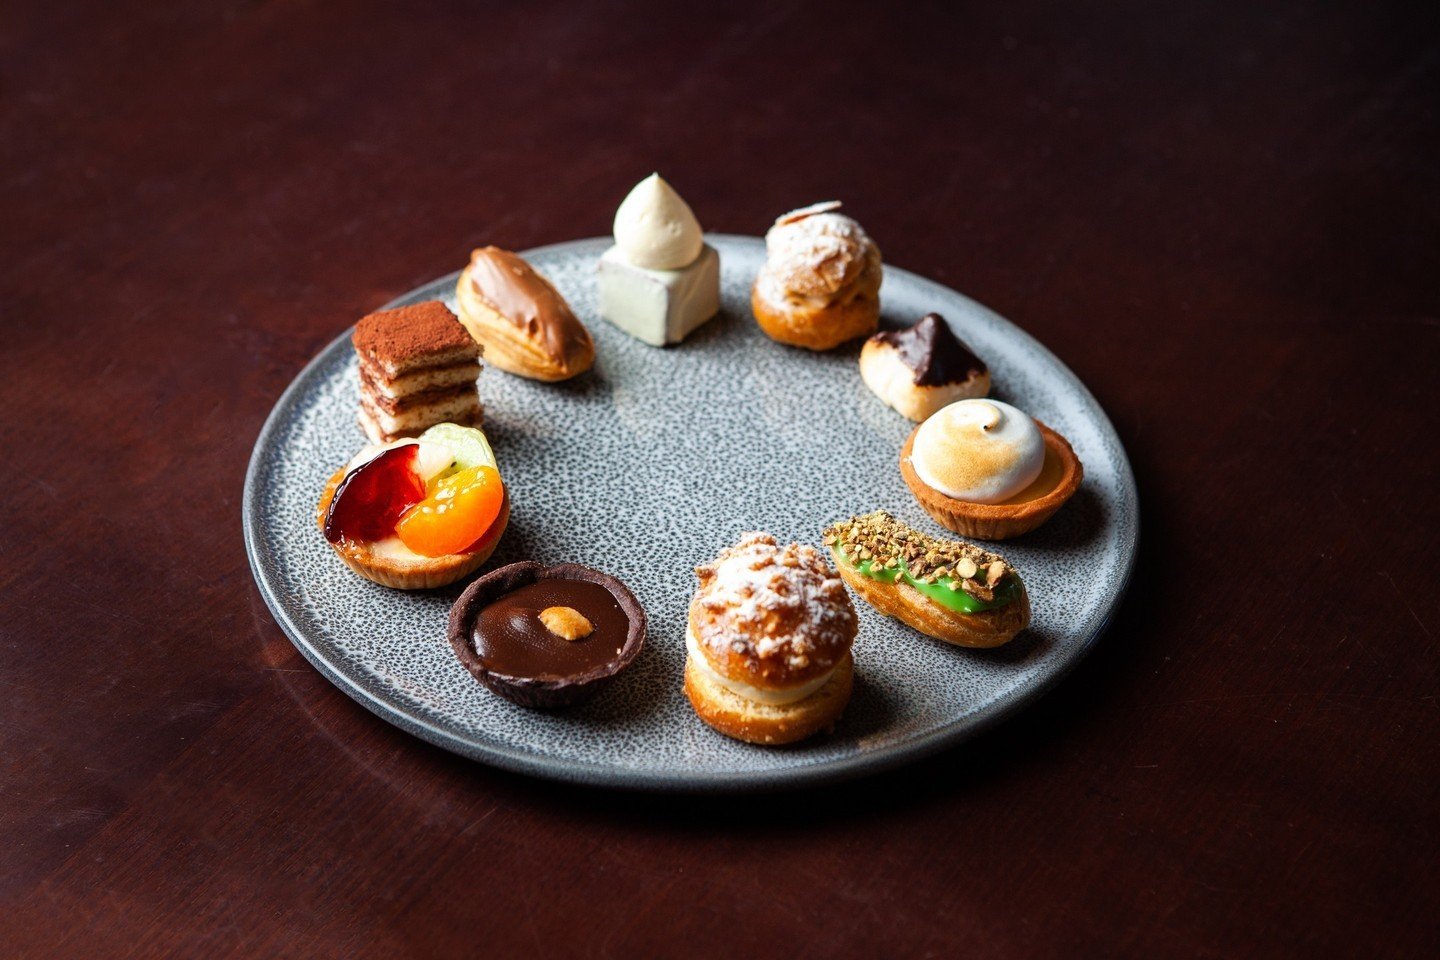 Get ready to tantalize your taste buds with an exciting assortment of petit four every time you visit us. Our selection is always changing to keep things fresh and keep you coming back for more!⁠
⁠